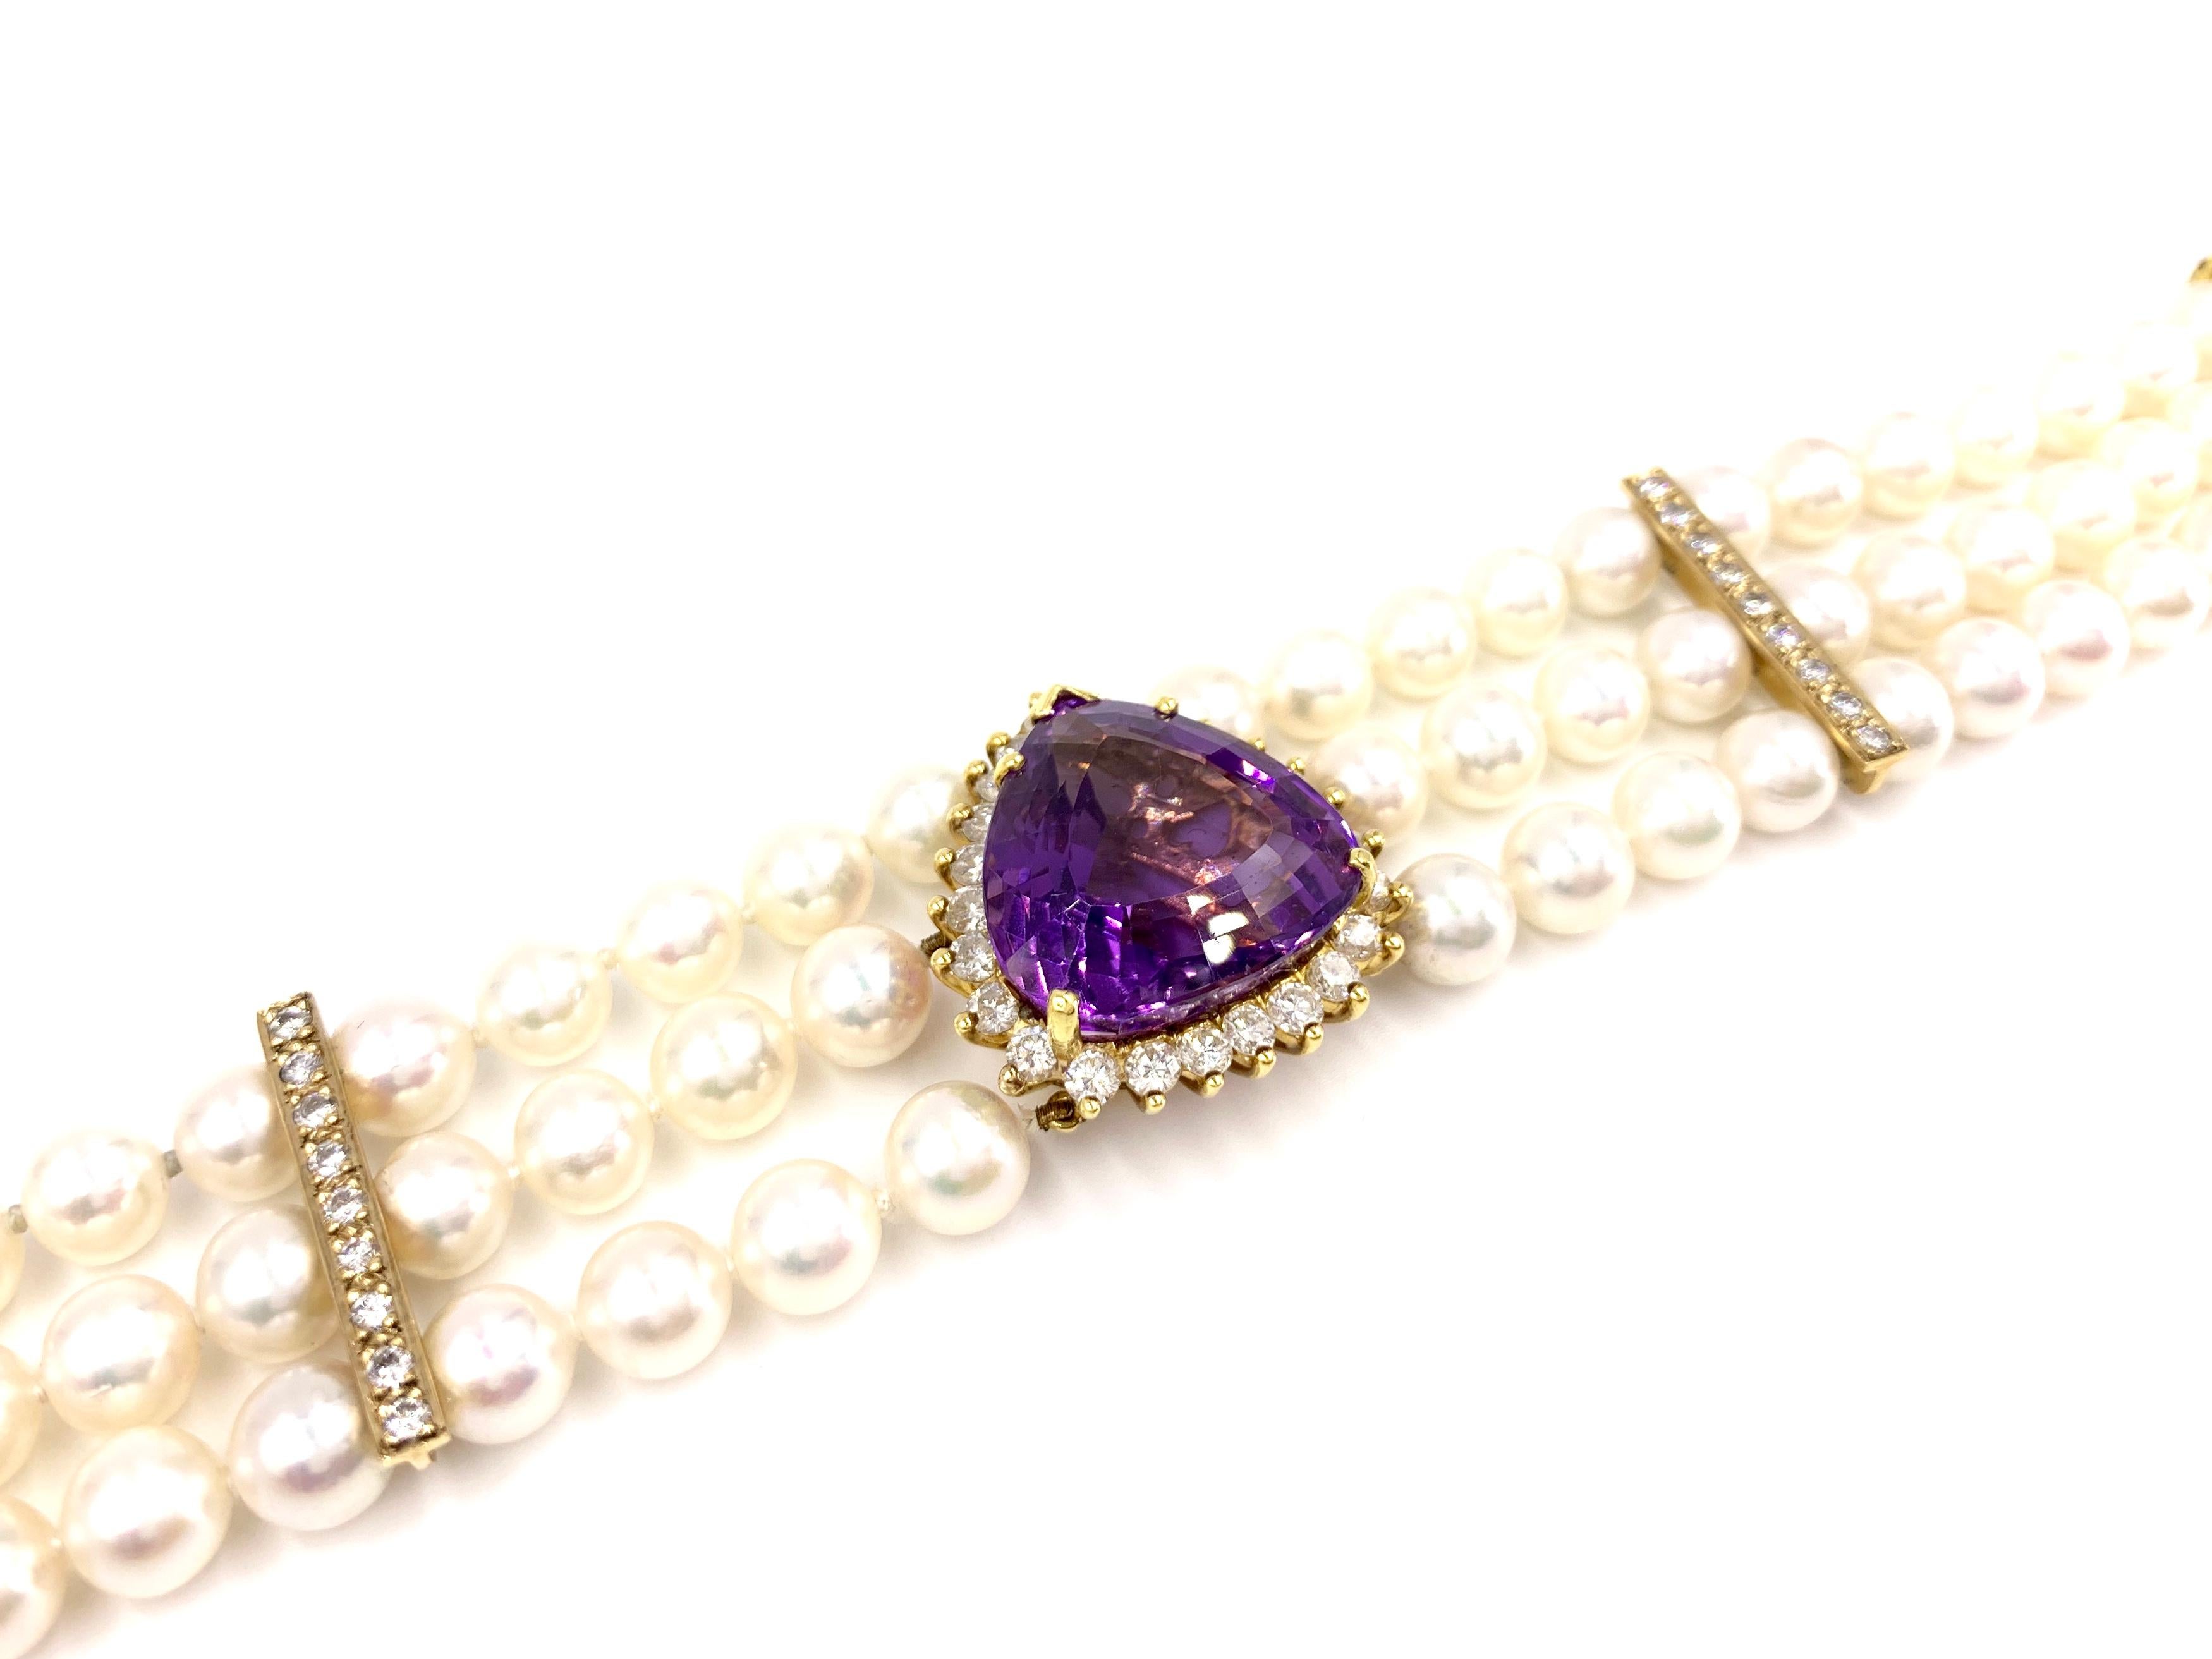 Victorian 18 Karat Three-Strand Pearl Bracelet with Amethyst and Diamond Center For Sale